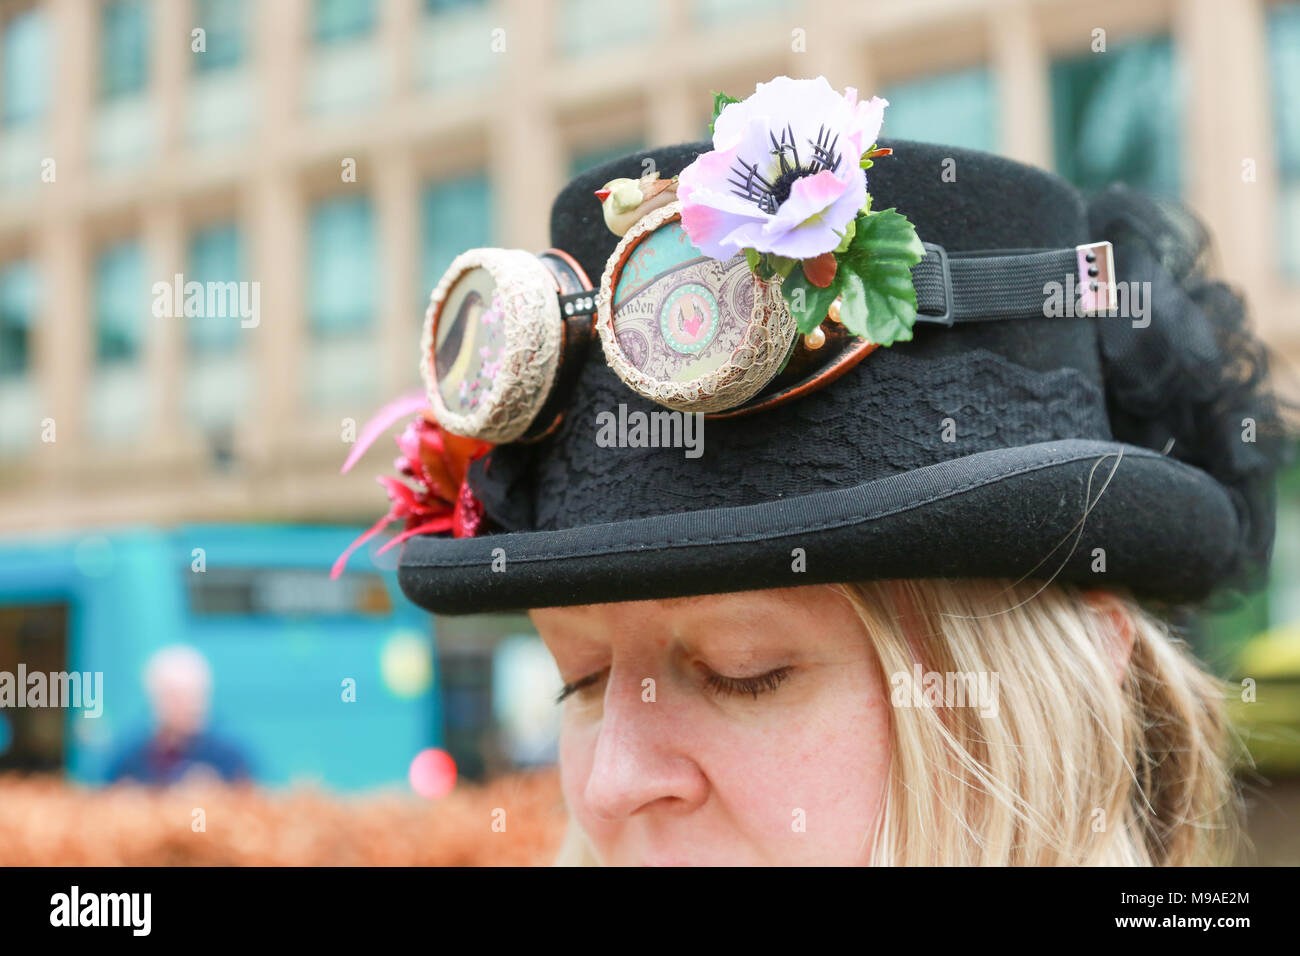 A lady with a steampunk hat. Steampunk is a style of fashion that combines historical elements and anachronistic technology, often inspired by Edwardian science fiction. Peter Lopeman/Alamy Live News Stock Photo